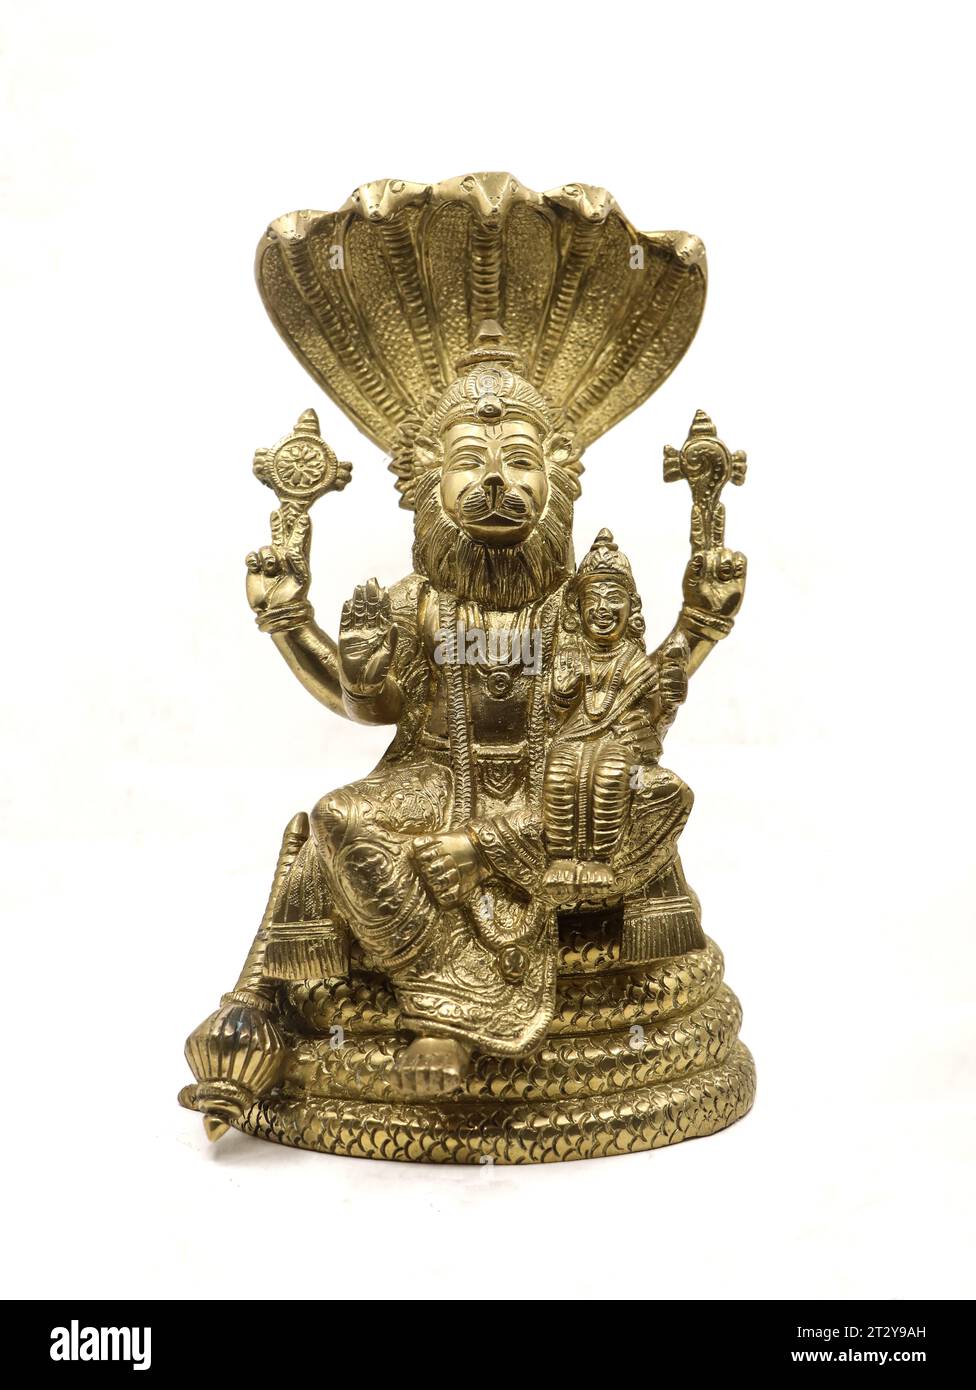 golden statue of lord vishnu avatar, narasimha lion faced with multiple hands sitting on a snake with multiple heads next to goddess lakshmi Stock Photo